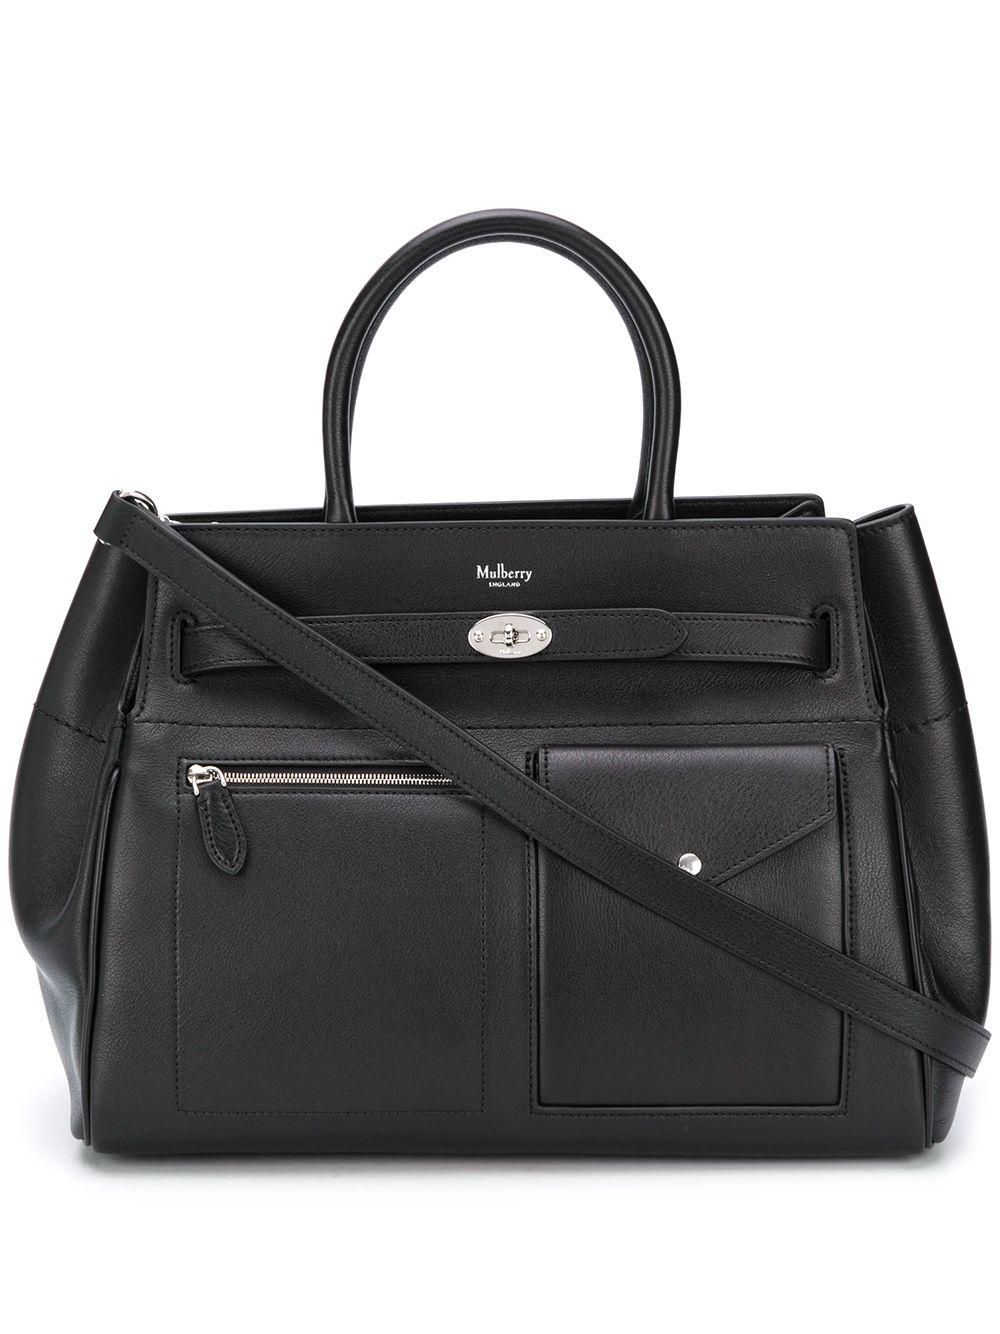 Mulberry Bayswater Multi-pocket Tote Bag in Black | Lyst